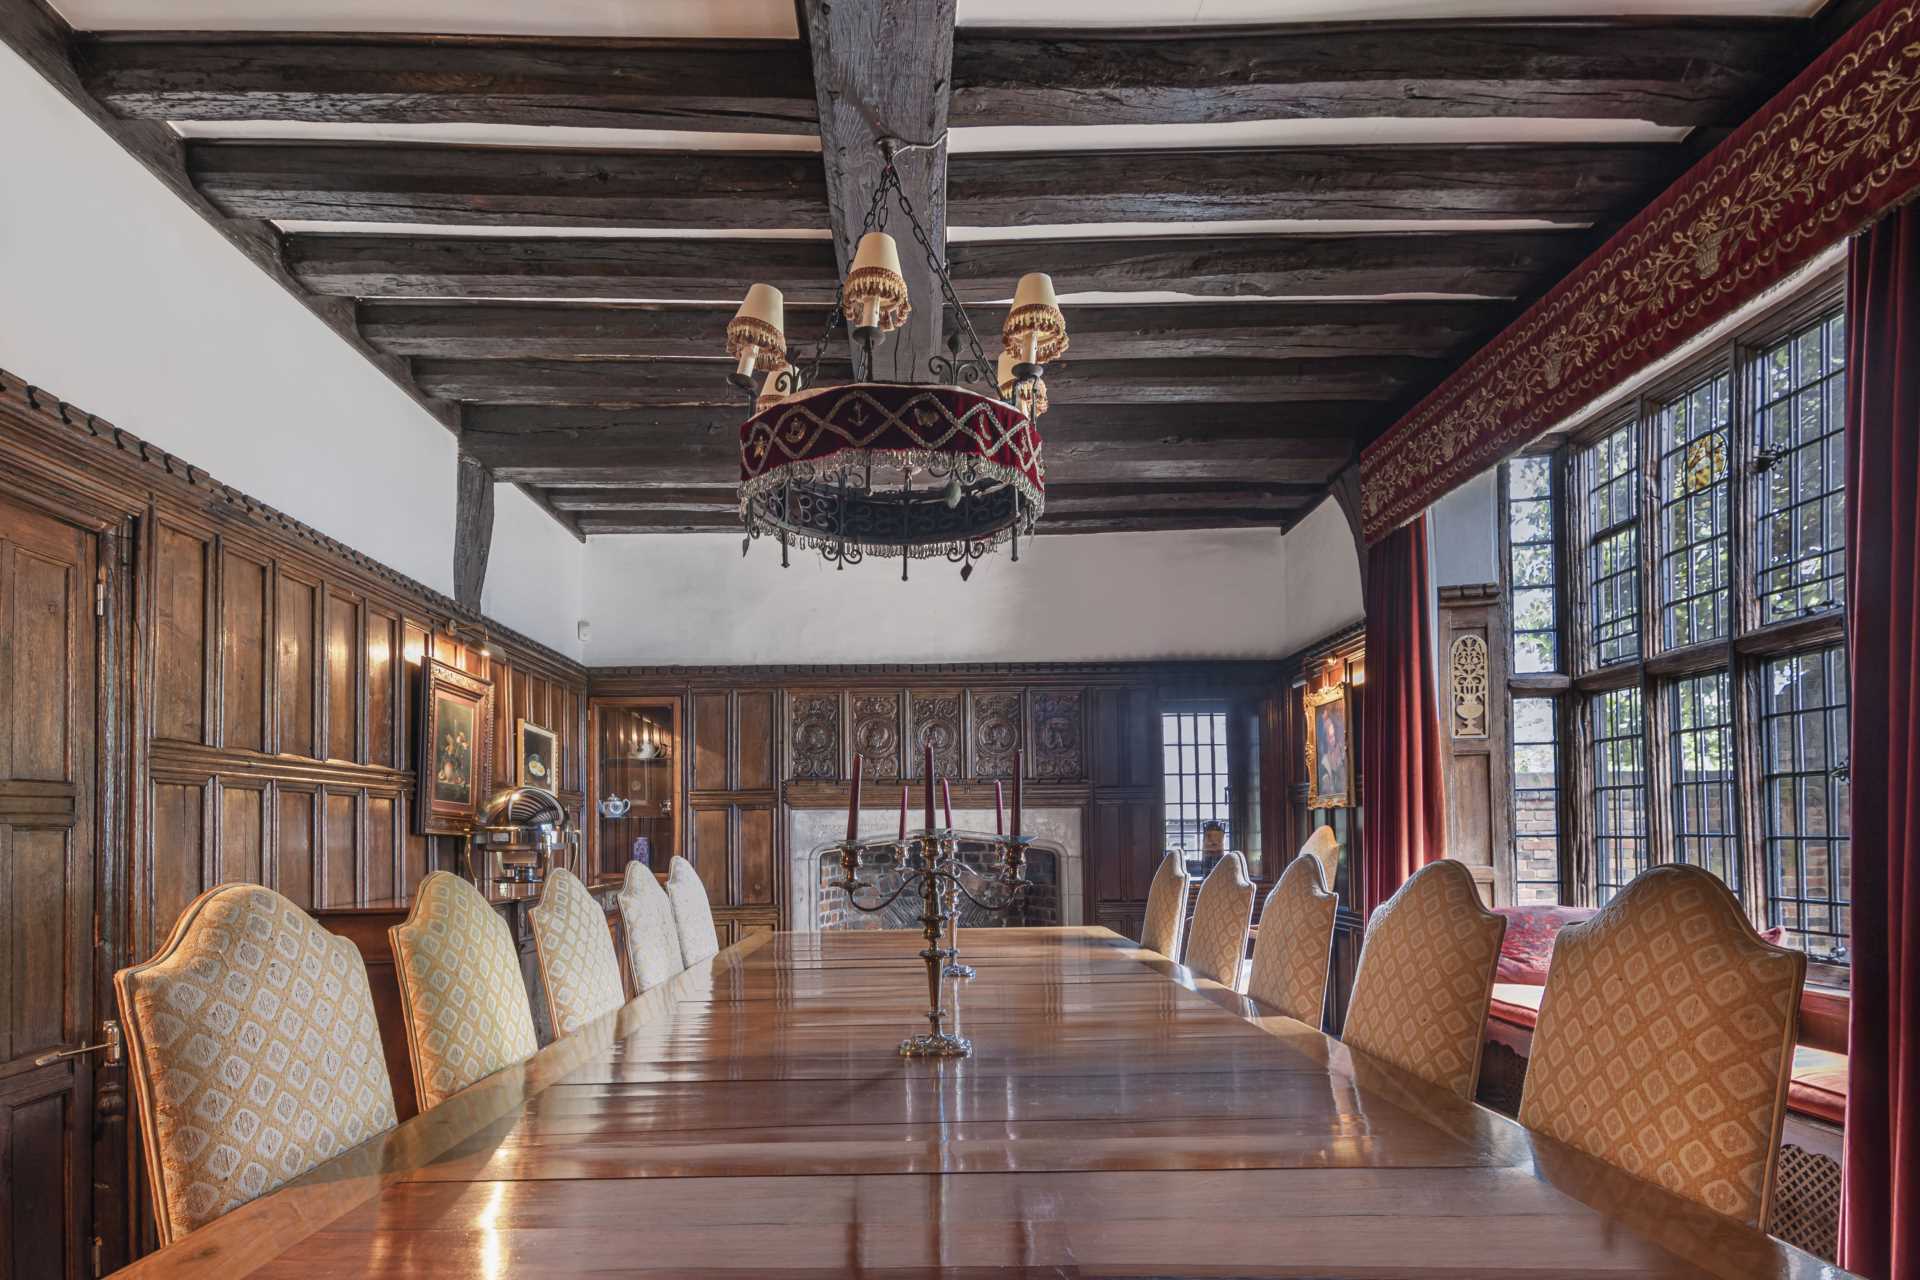 NEW YORK POST - 500-year-old UK home that was dismantled and relocated asks $17.5M